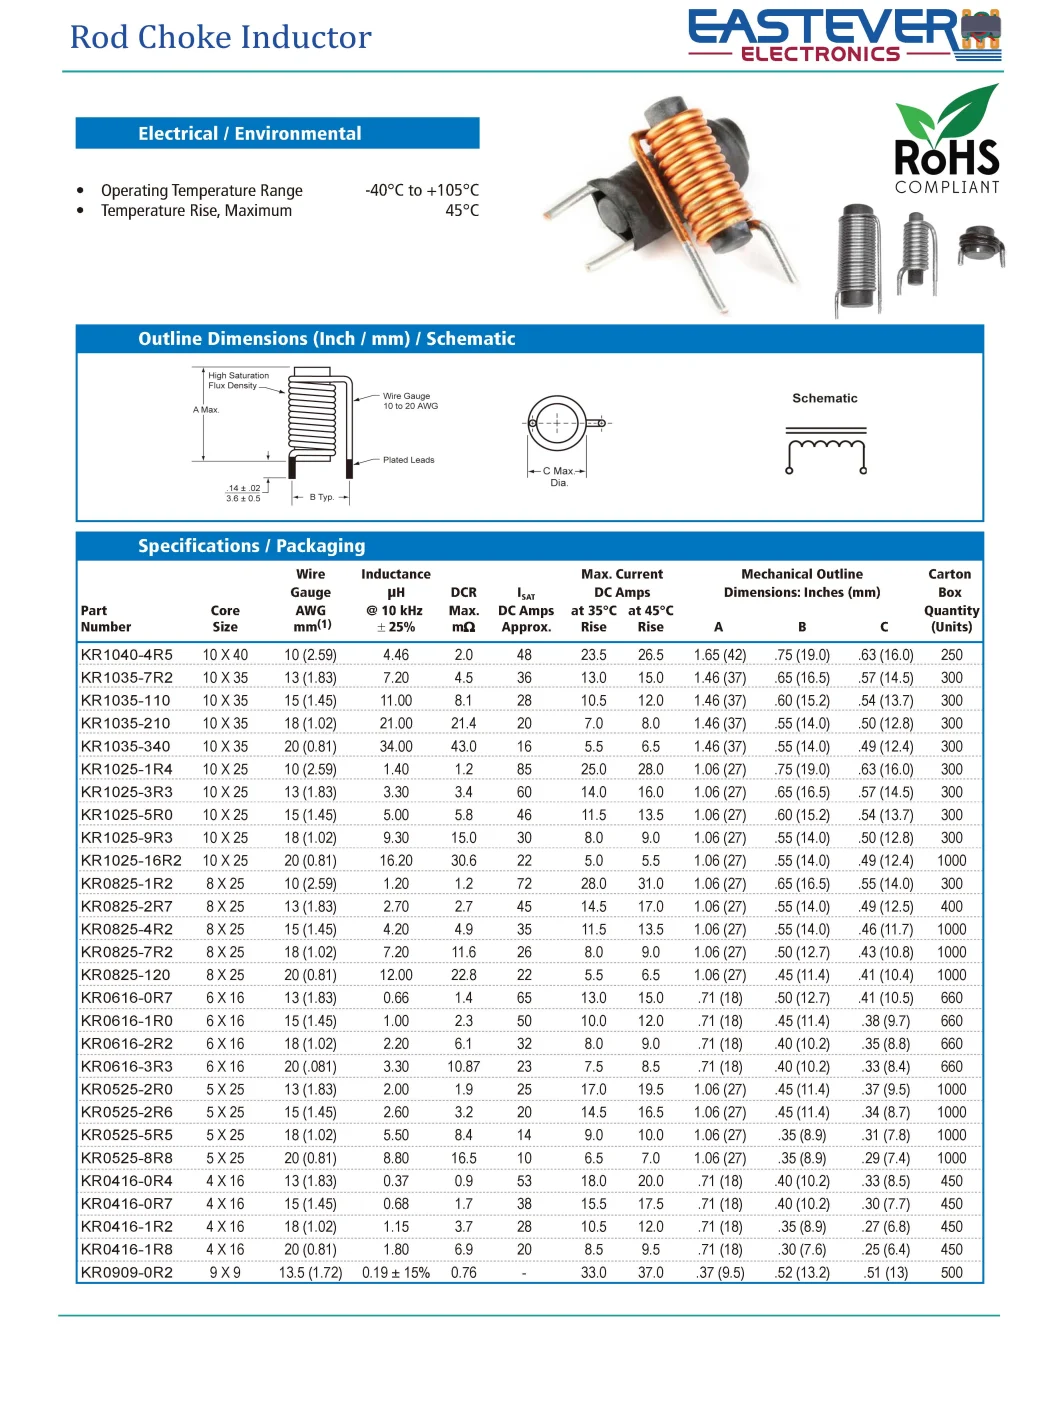 Rod Choke Coil Inductors Kr0825-1r2 for Electronic Product, Power Supply, Use, Passive Components for Audio, Radio Use Inductor Supplier Factory in China.